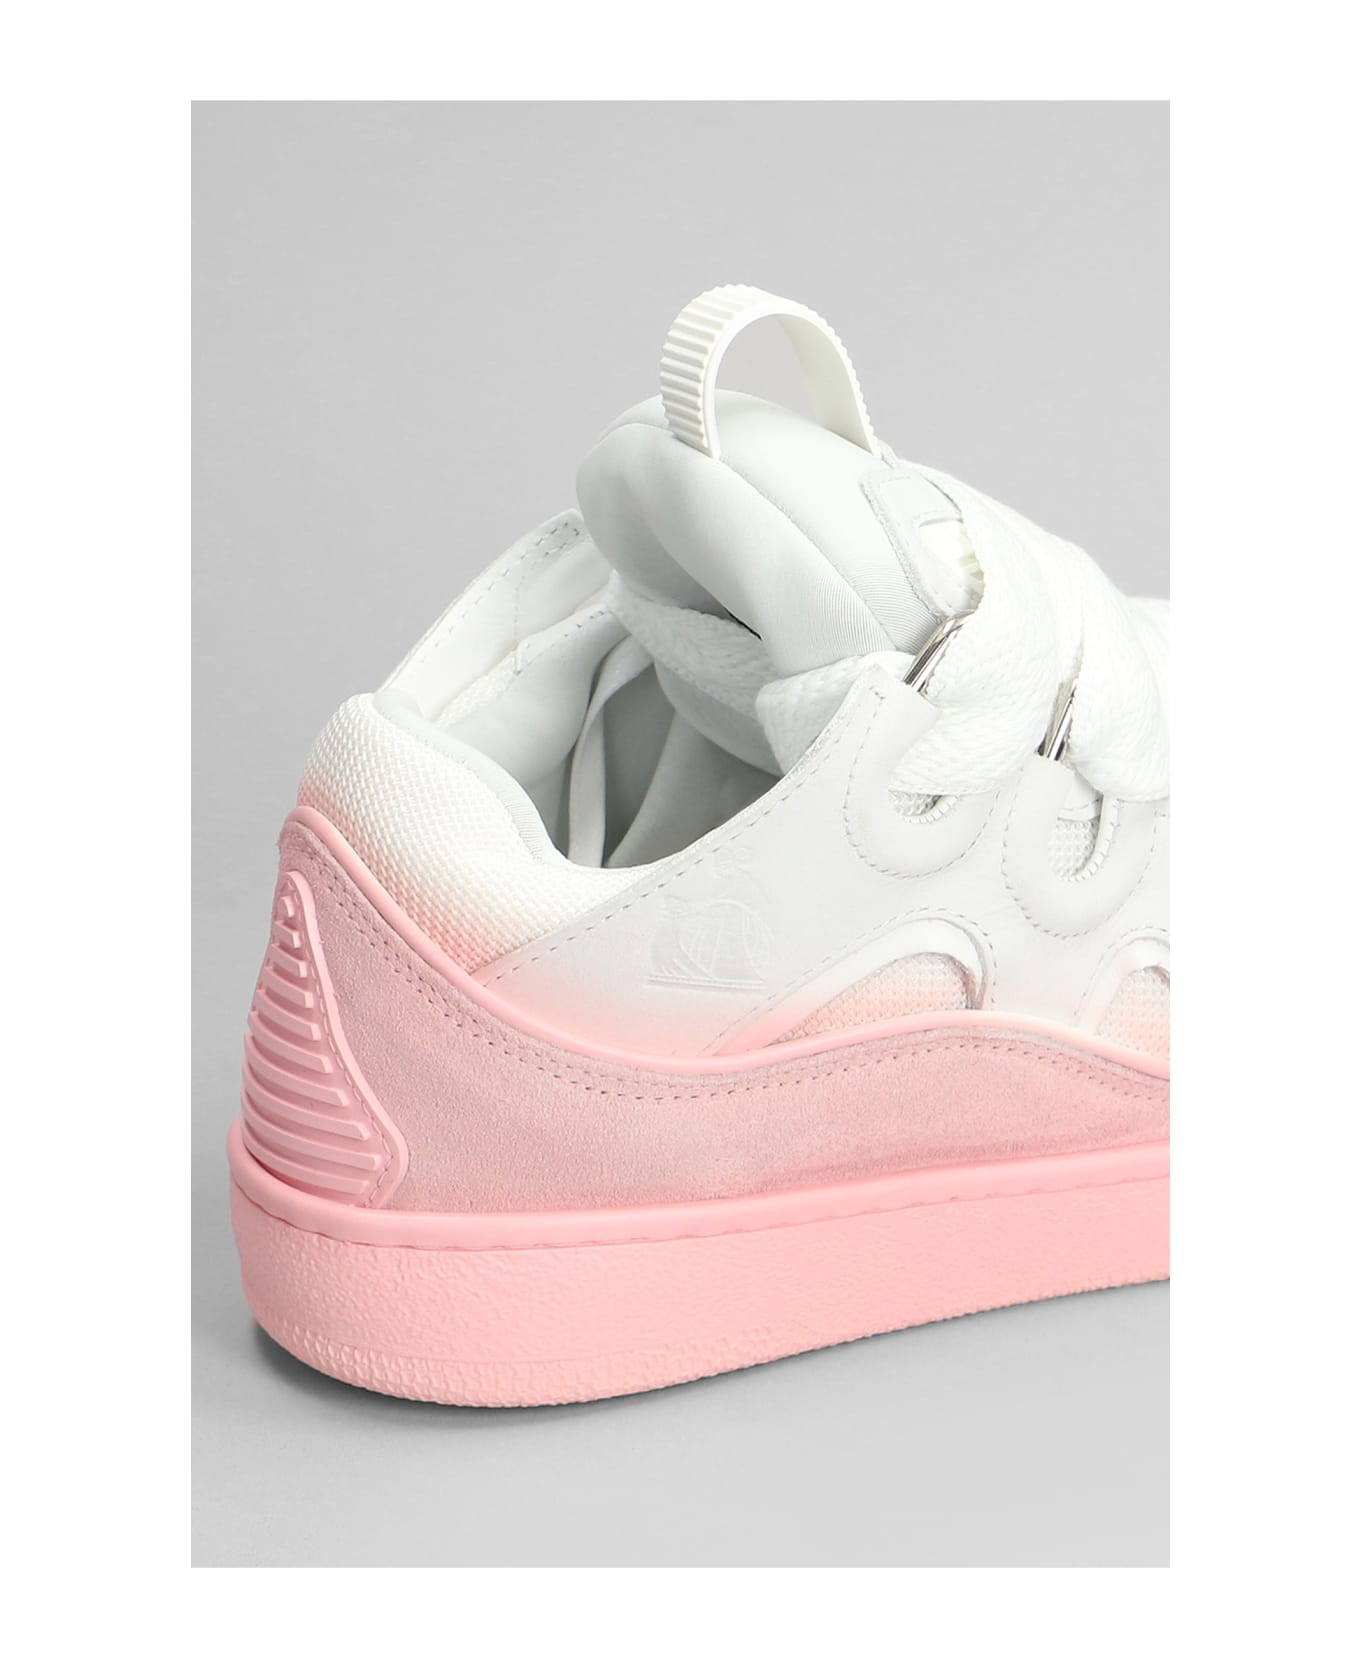 Lanvin Curb Sneakers In Rose-pink Leather - rose-pink